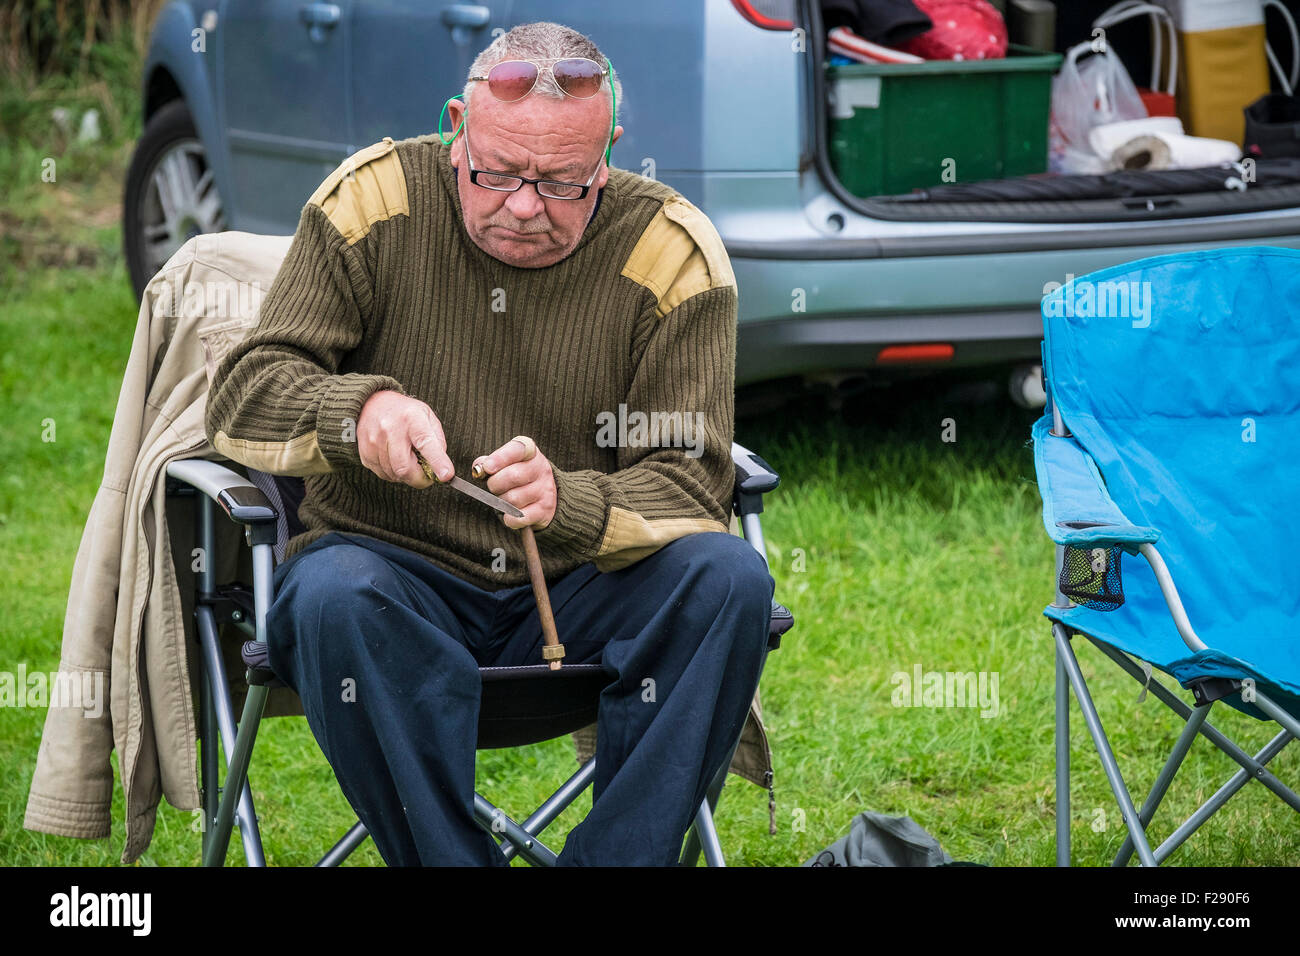 A man filing a piece of metal at the Essex Country Show, Barleylands, Essex. Stock Photo